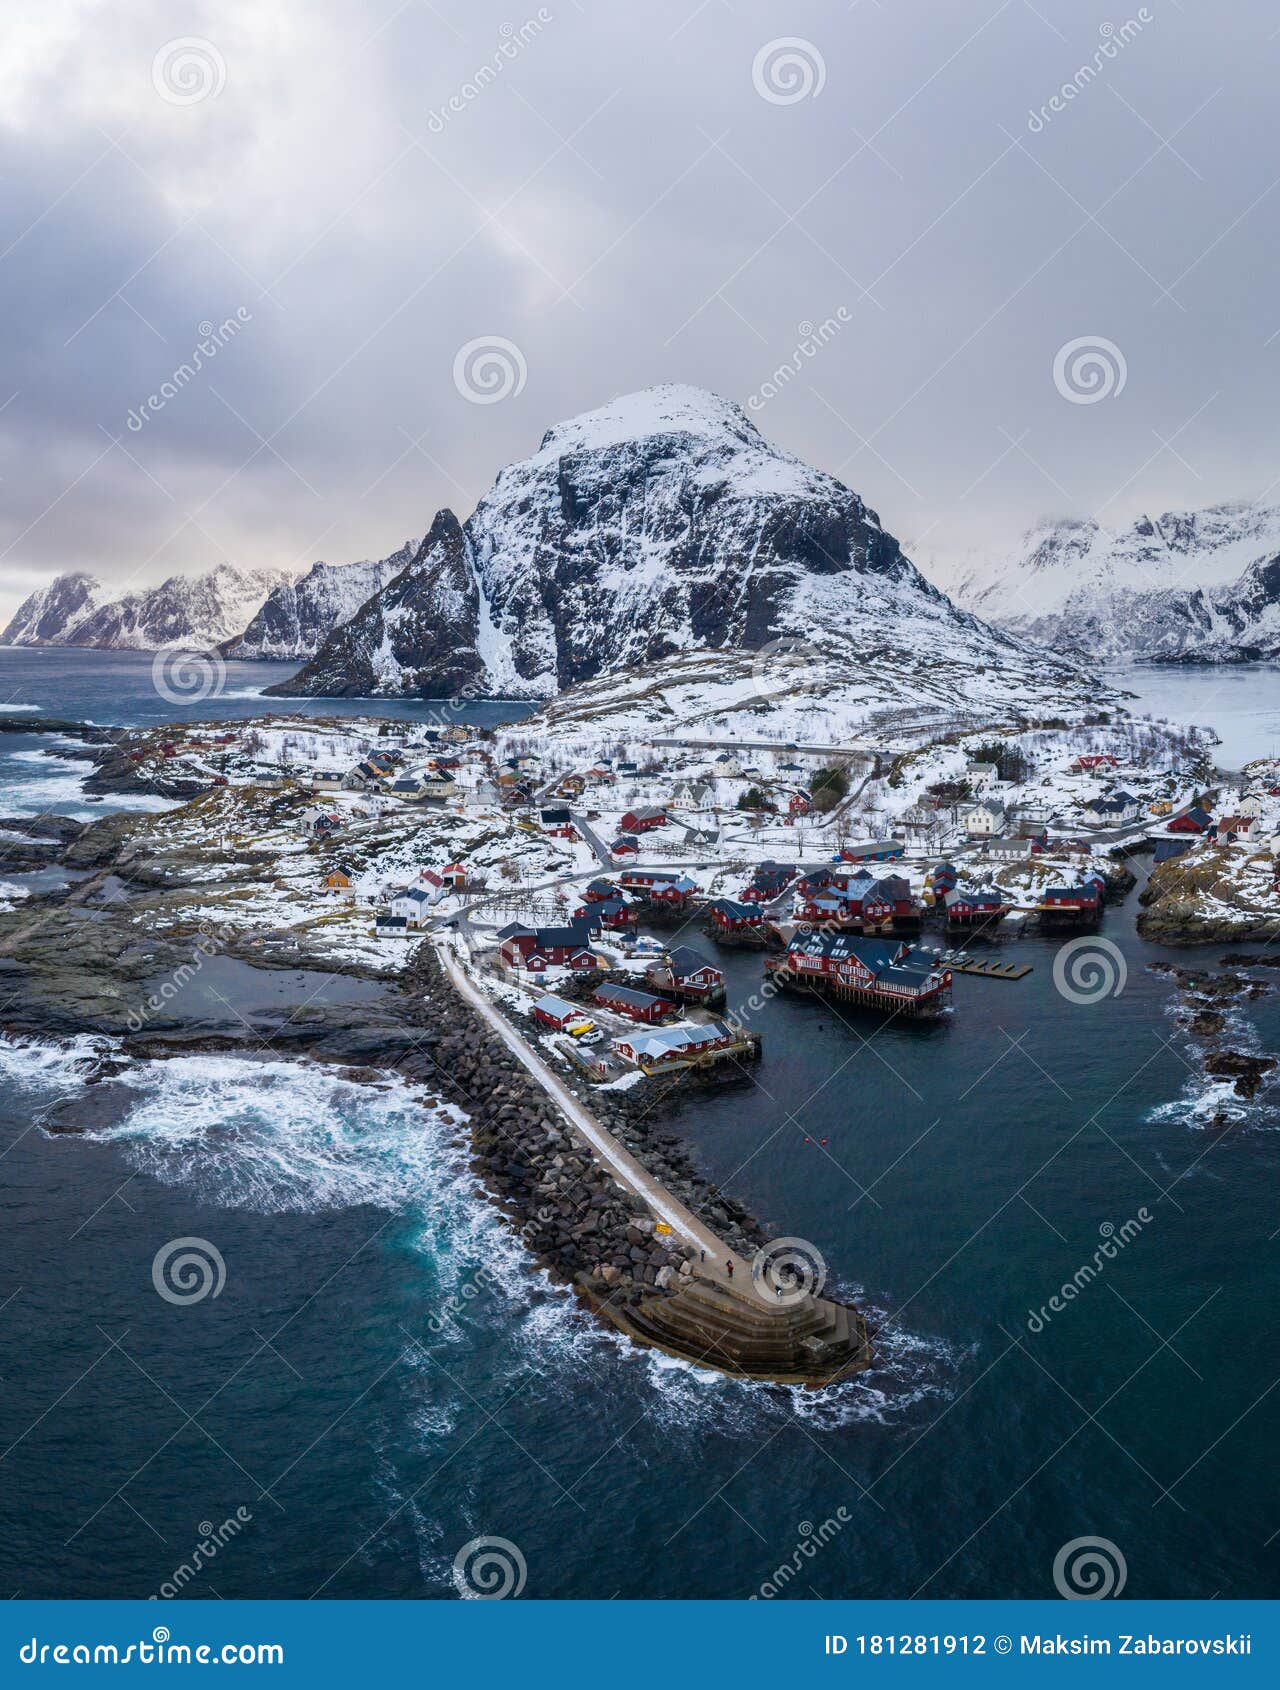 fishing village a, rorbu, sea and mountains in winter. moskenes, lofoten islands. landscape of norway. aerial view